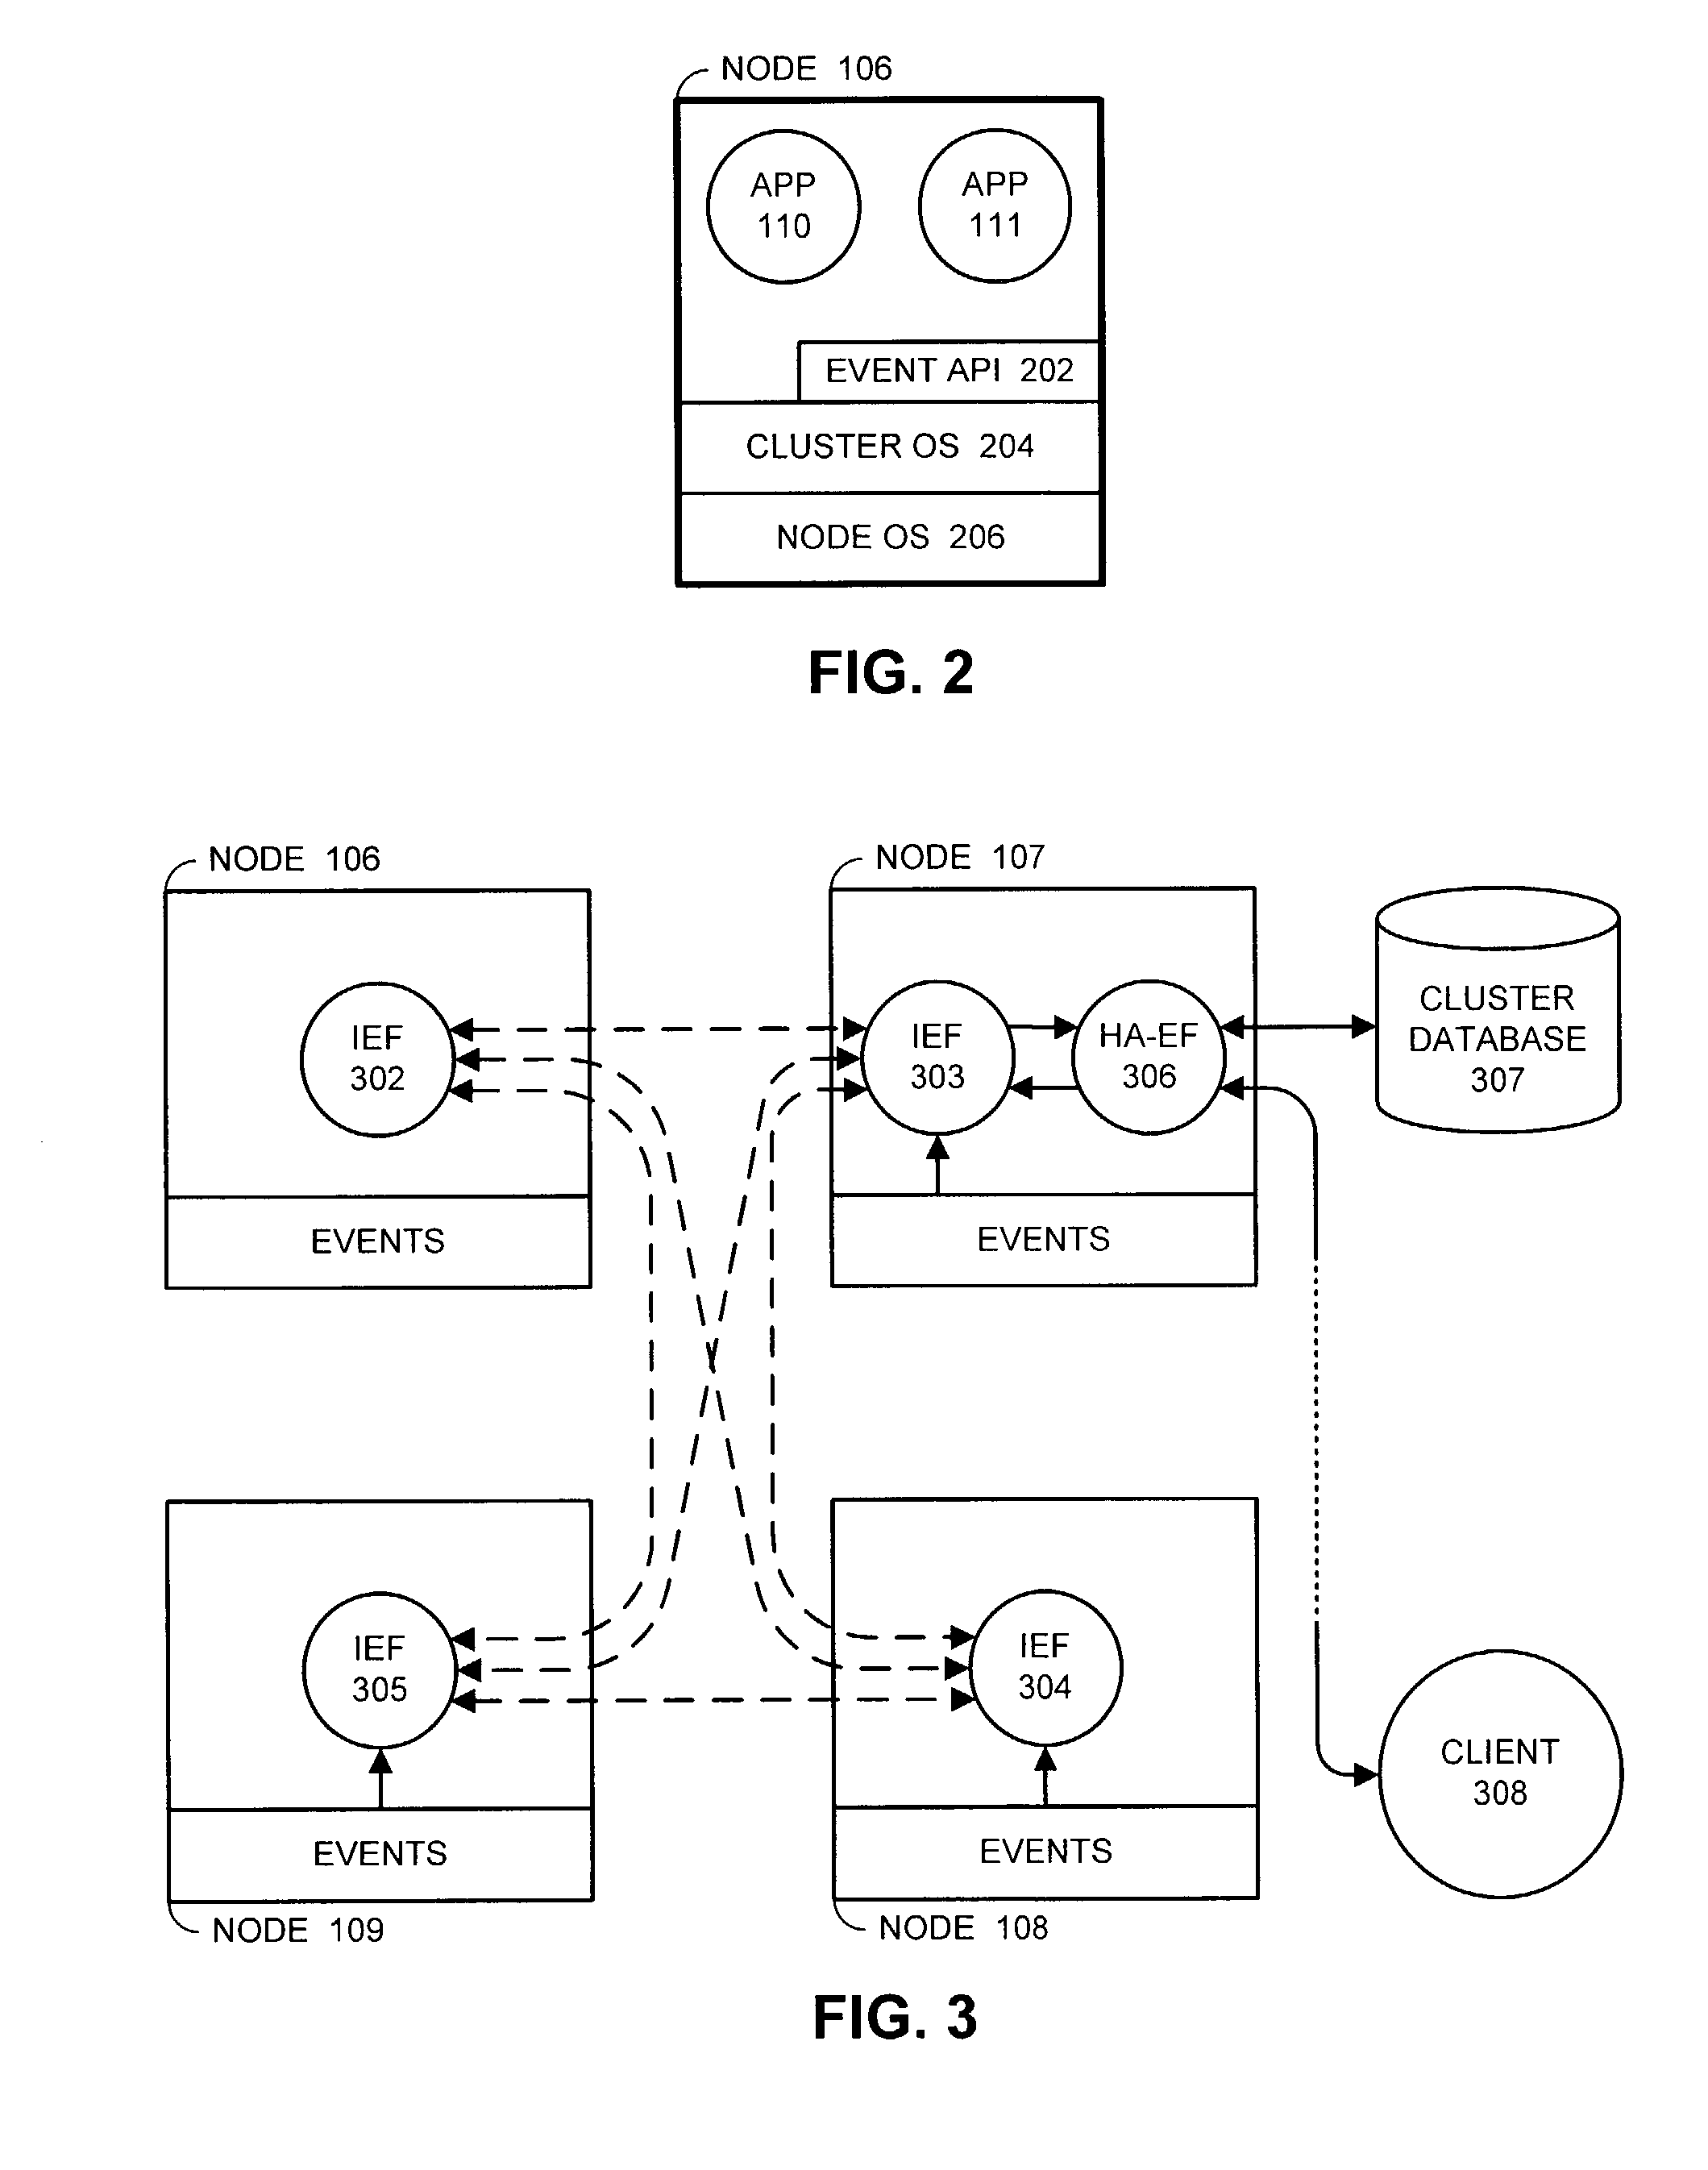 Facilitating event notification through use of an inverse mapping structure for subset determination